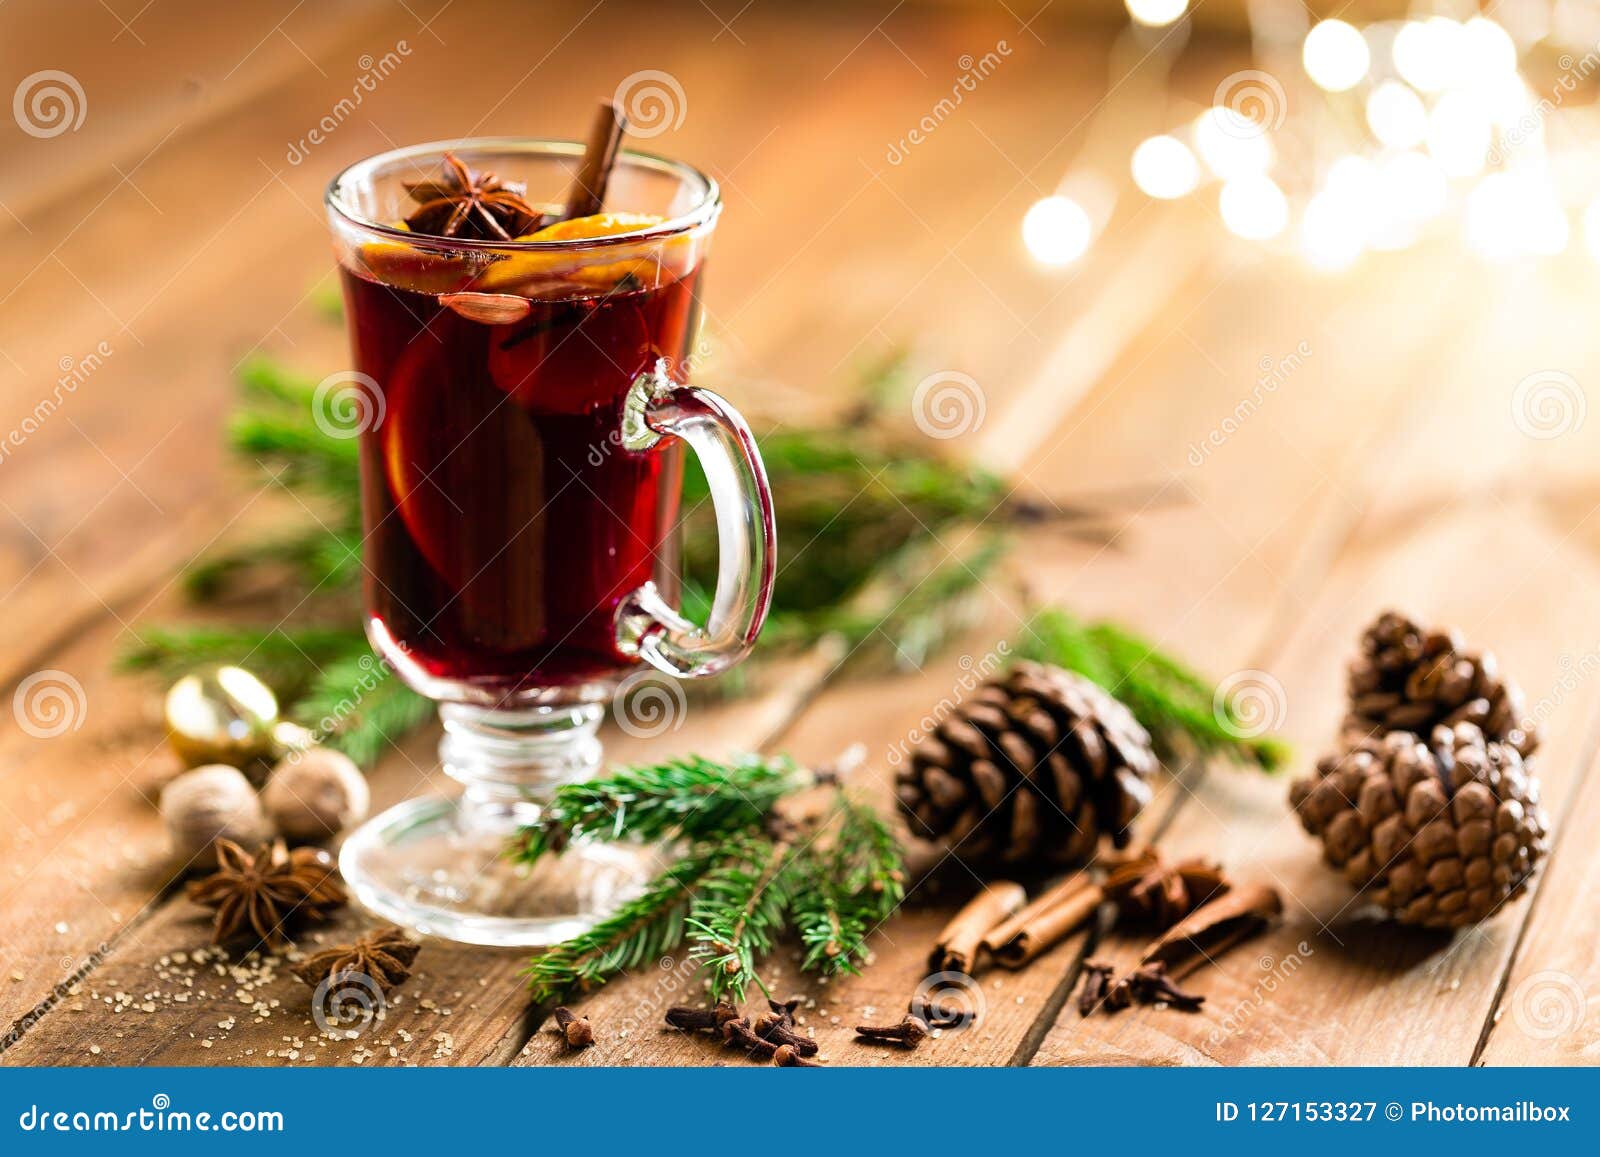 Christmas Mulled Red Wine with Spices and Oranges on a Wooden Rustic ...